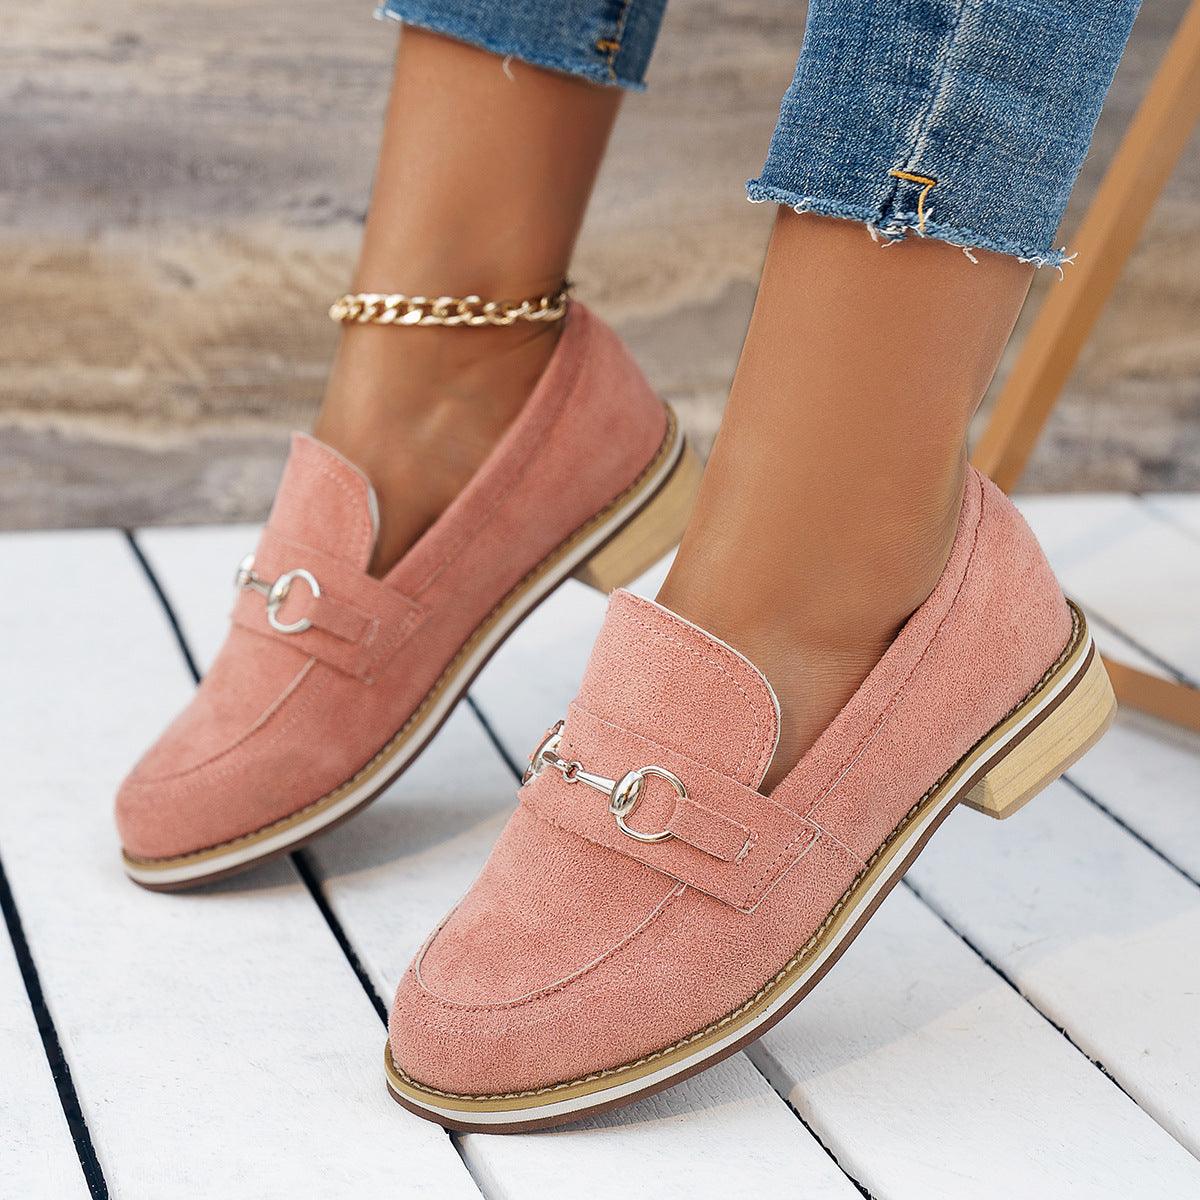 Women Flats Shoes Casual Low Heel Loafers Spring Summer Fashion Walking Shoes